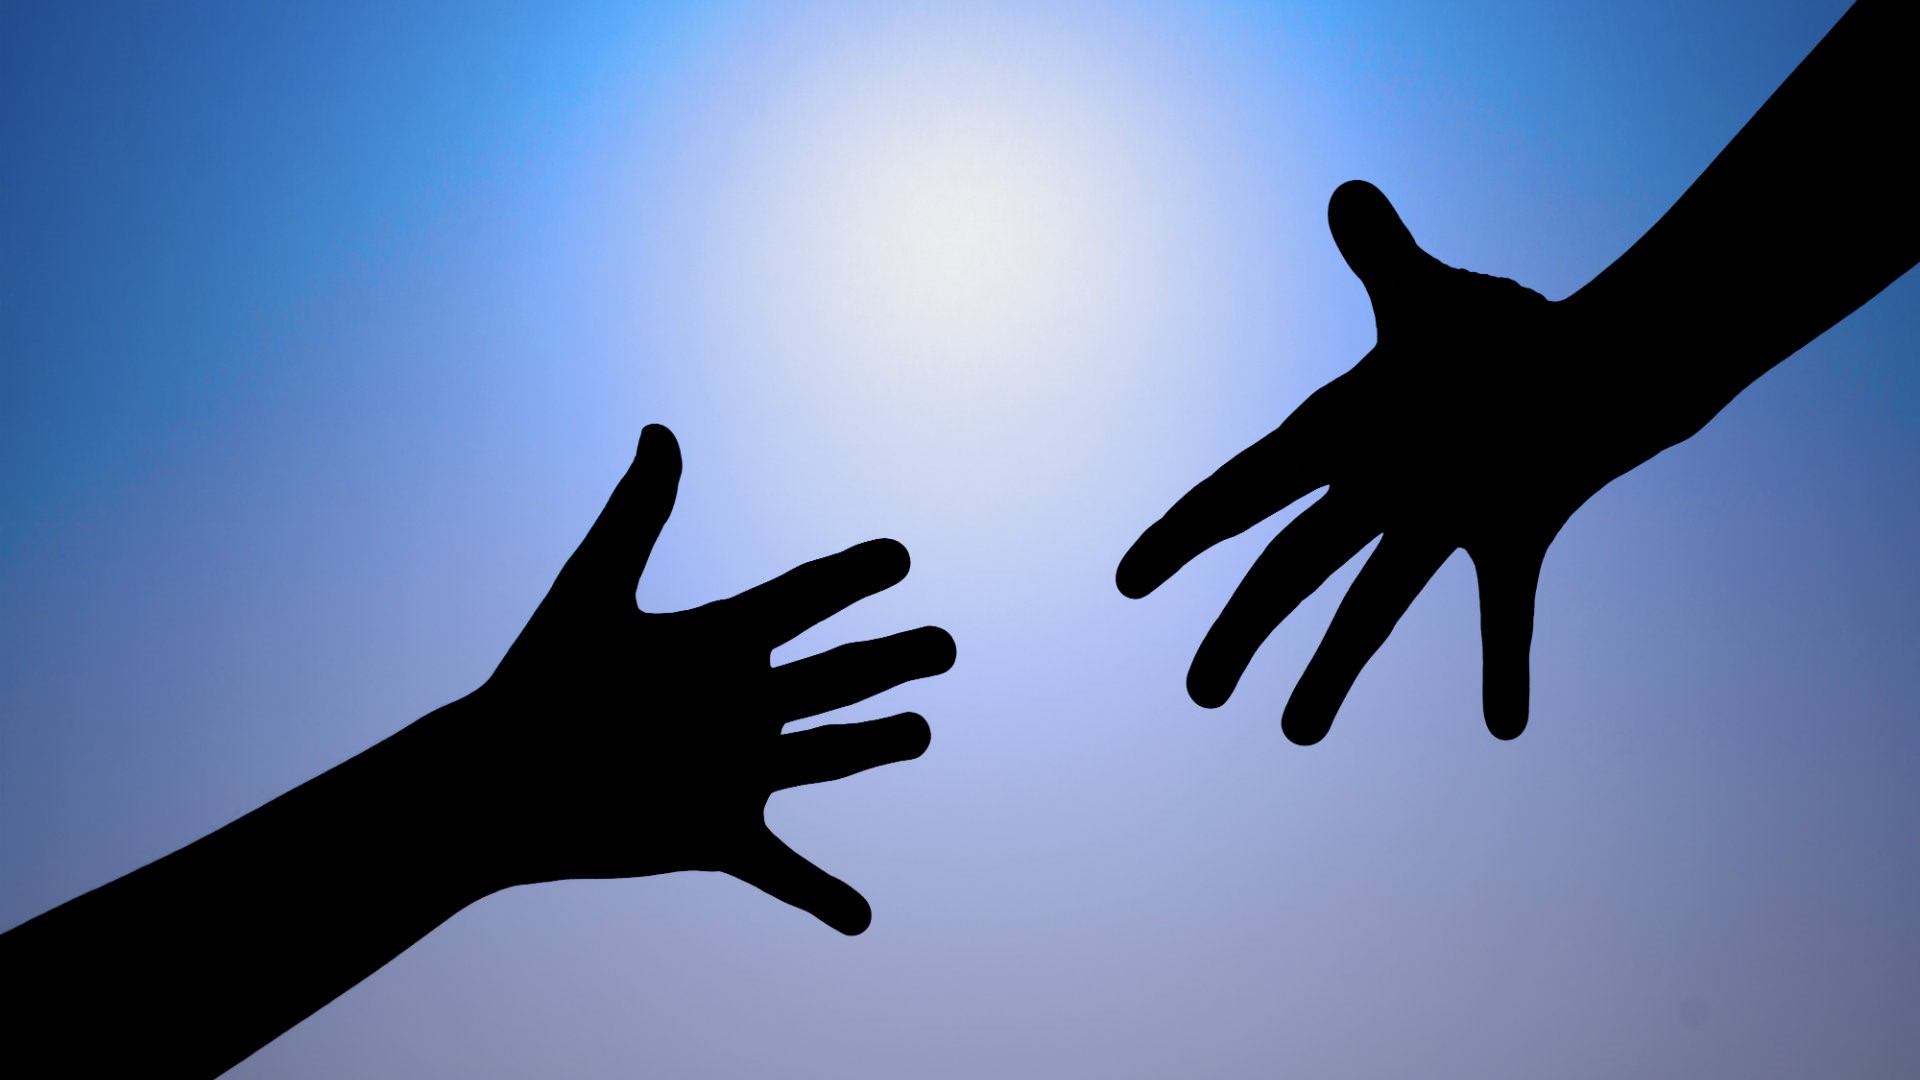 A photo of two hands; one reaching out for the other one